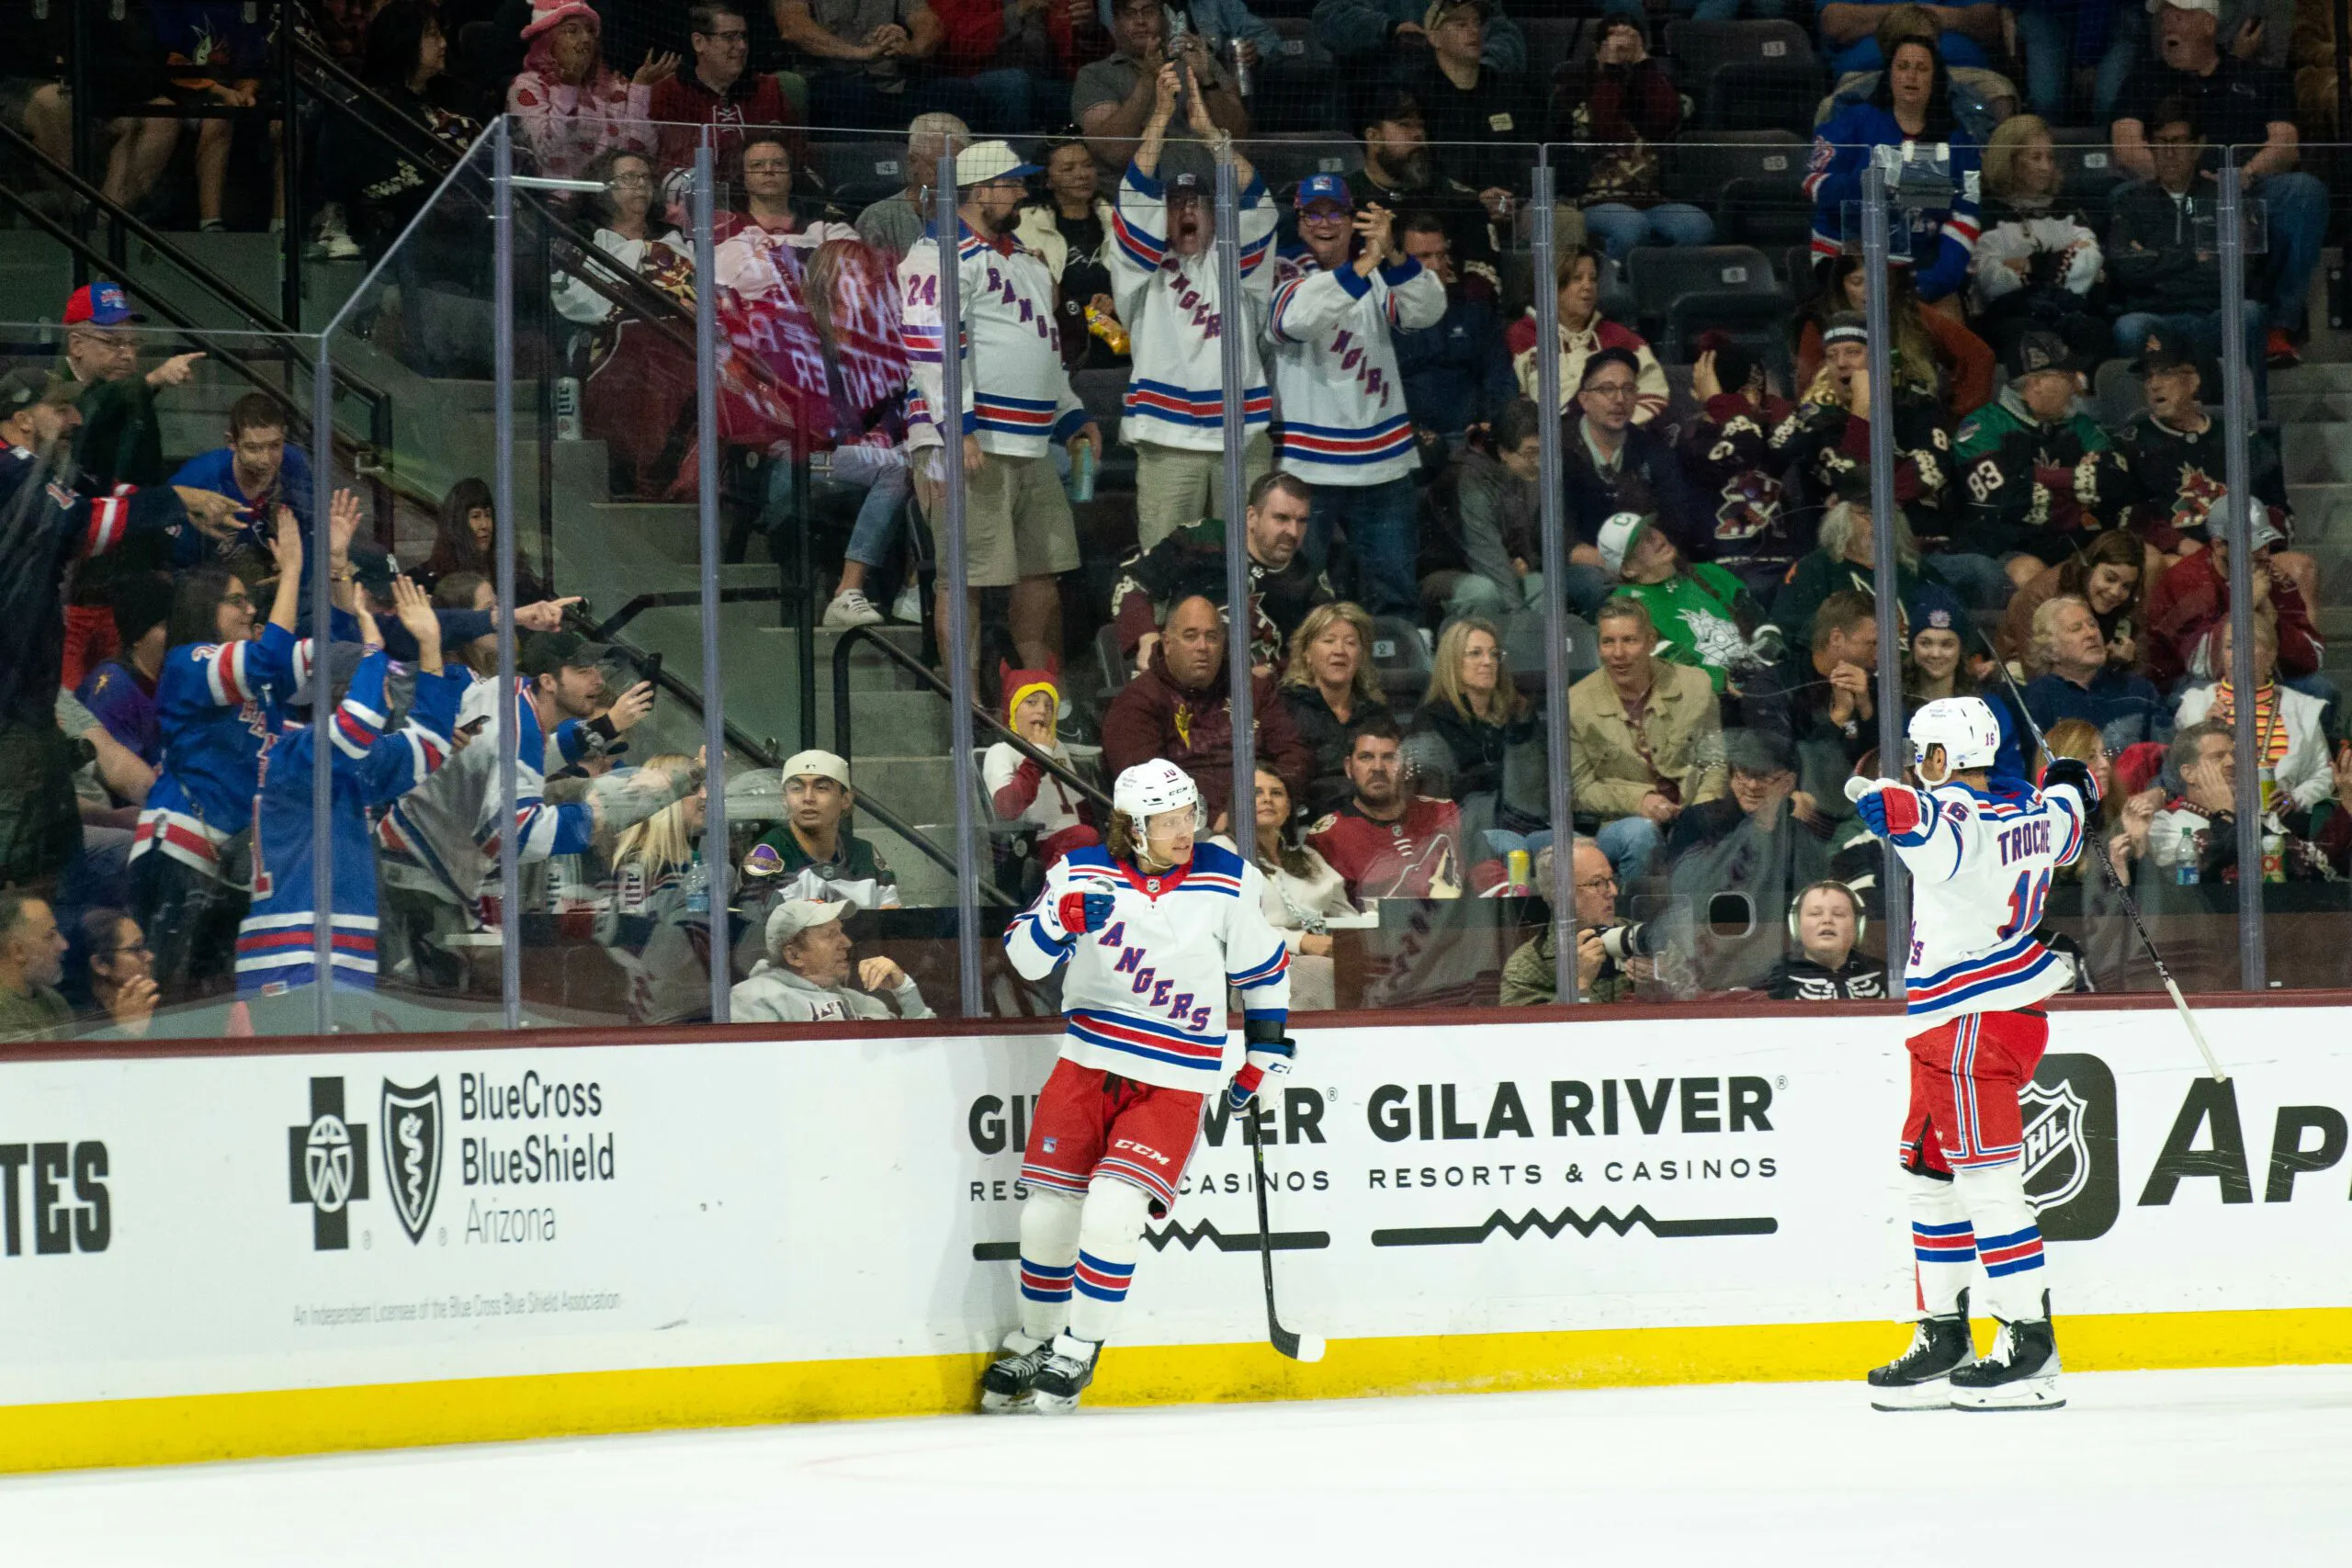 From ‘unreal’ ice to a ‘poo poo’ dressing room: New York Rangers react to the Arizona Coyotes’ 5,000-seat rink